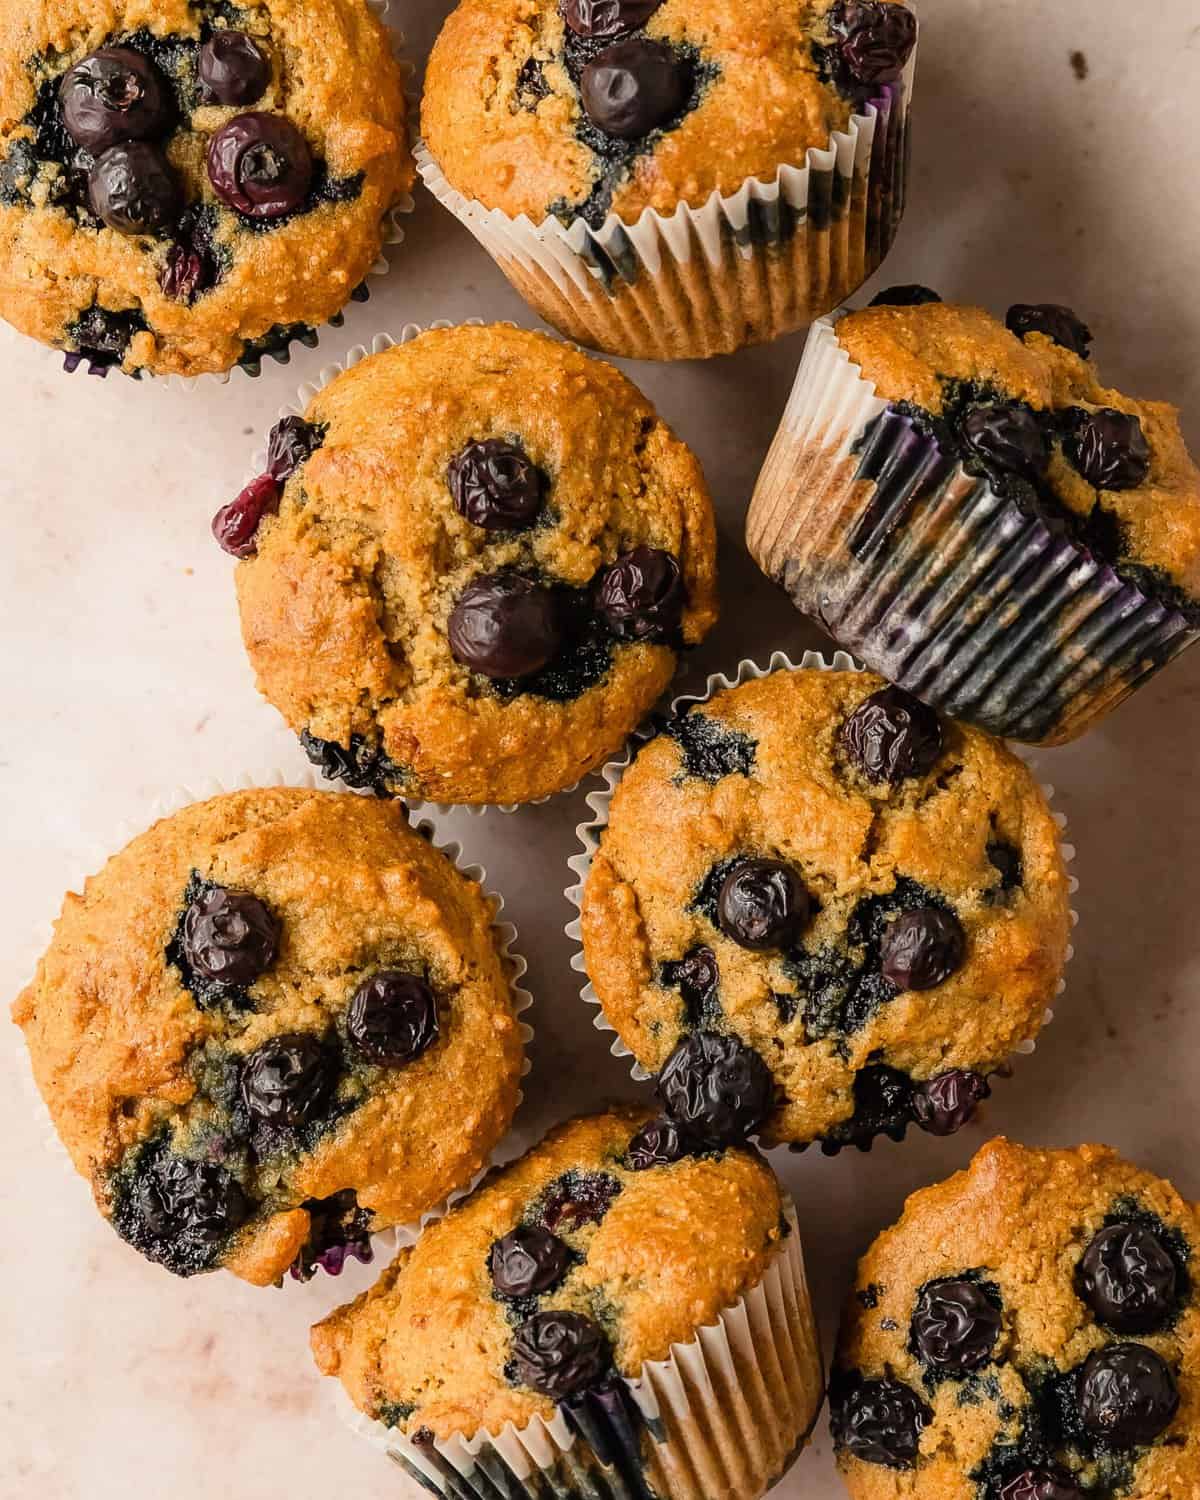 These almond flour blueberry muffins are quick and easy,  gluten-free muffins filled with fresh blueberries. This recipe for blueberry almond flour muffins is easy to make using simple, healthy ingredients. They’re moist, nutty, filled with cinnamon and blueberry flavor and are perfect for breakfasts and snacks.